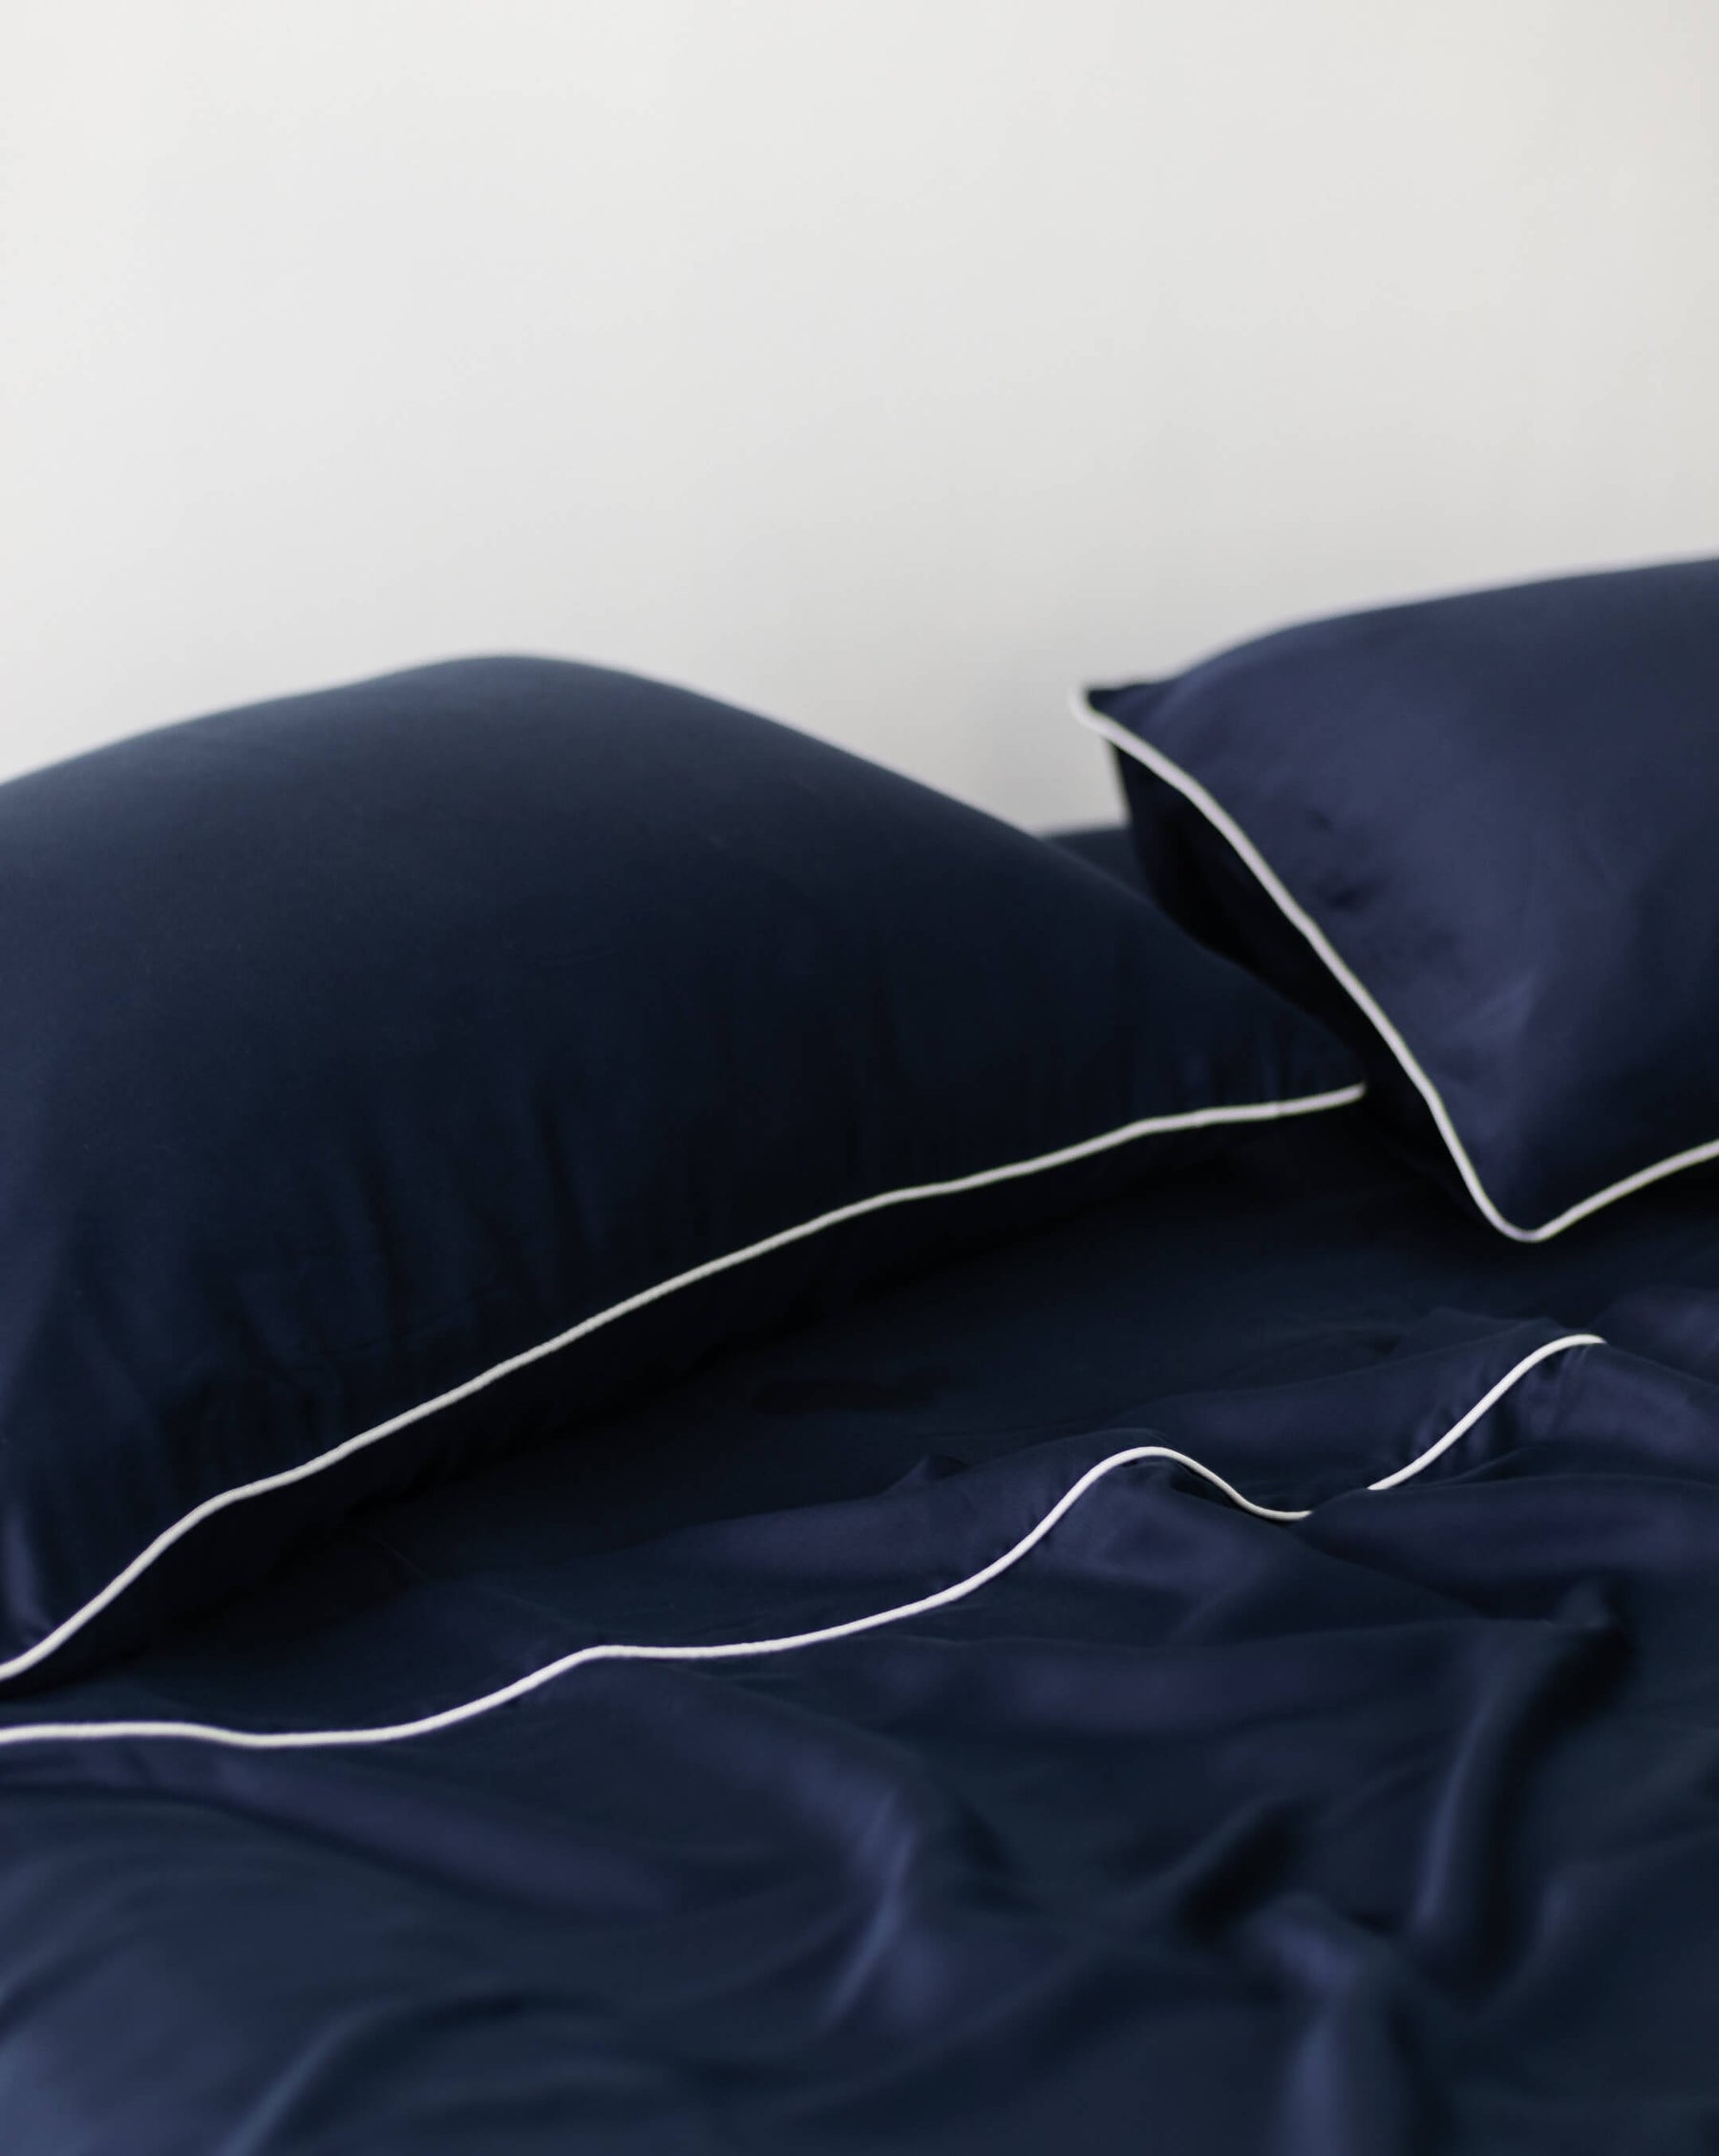 ava and ava ph organic bamboo lyocell 4pc sheet set (fitted sheet, flat sheet, pillowcases) navy blue with white contrast piping at the top hem